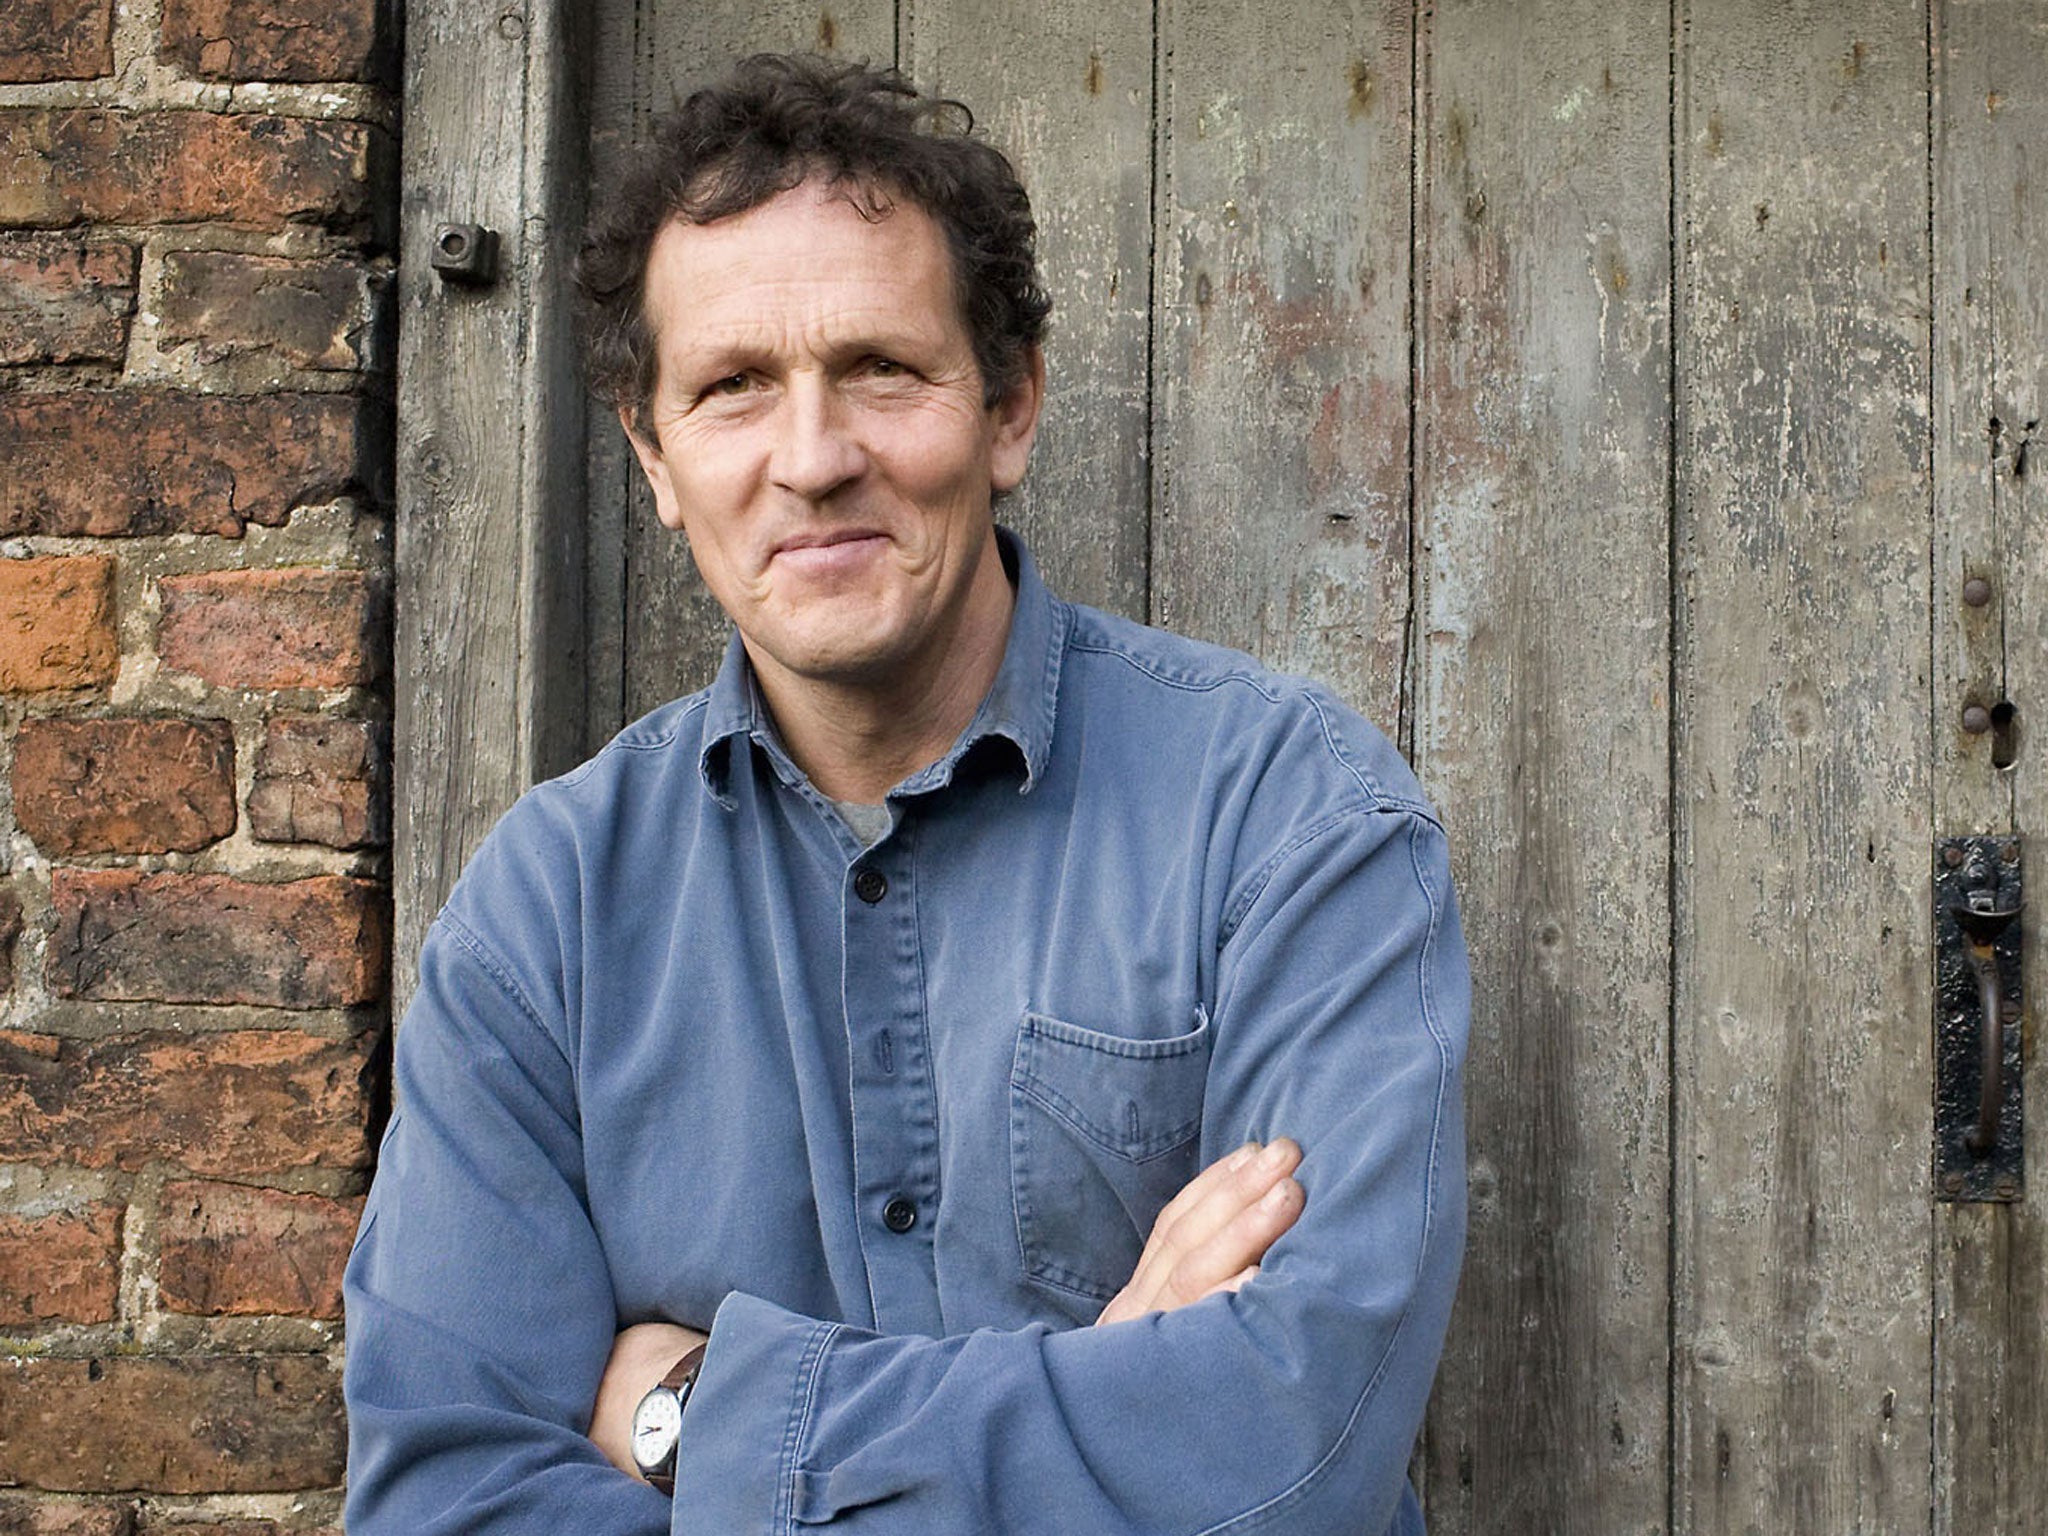 On the edge: Apine-style planting is again taking root in UK gardens. Monty Don is leading the trend